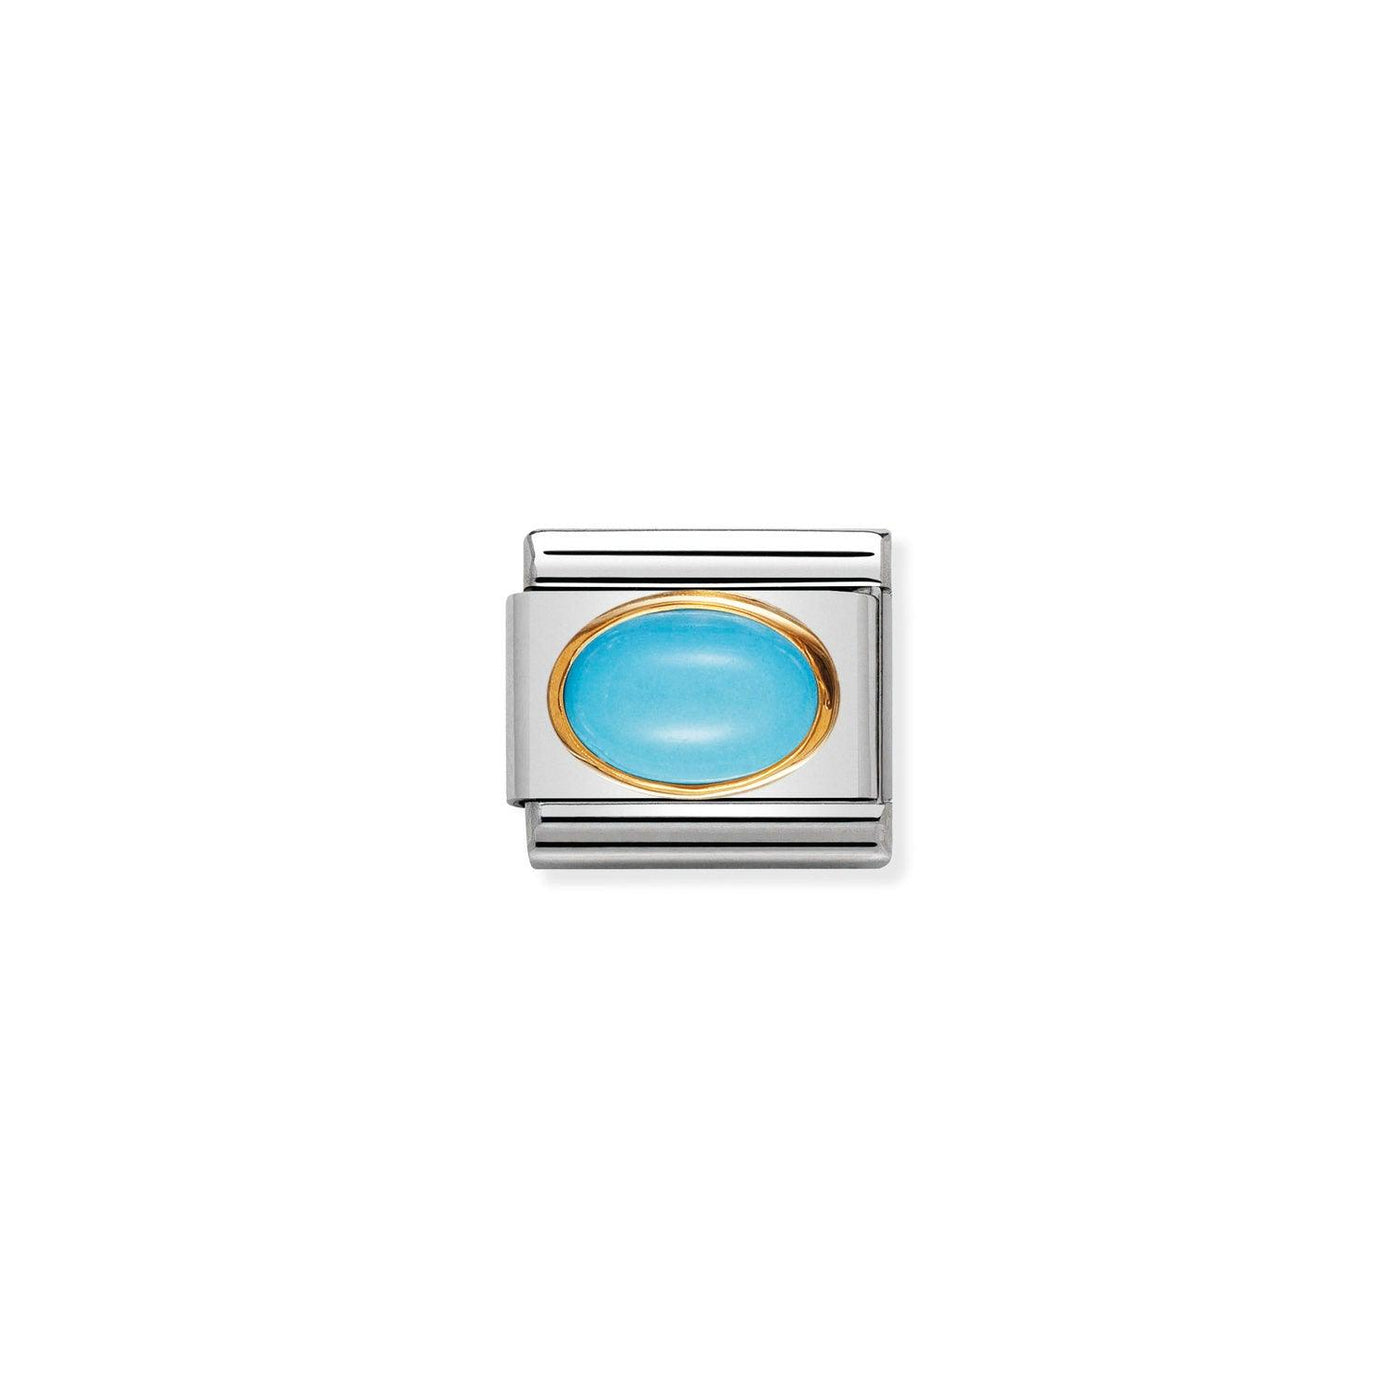 Nomination Classic Turquoise 18ct Gold Charm - Rococo Jewellery